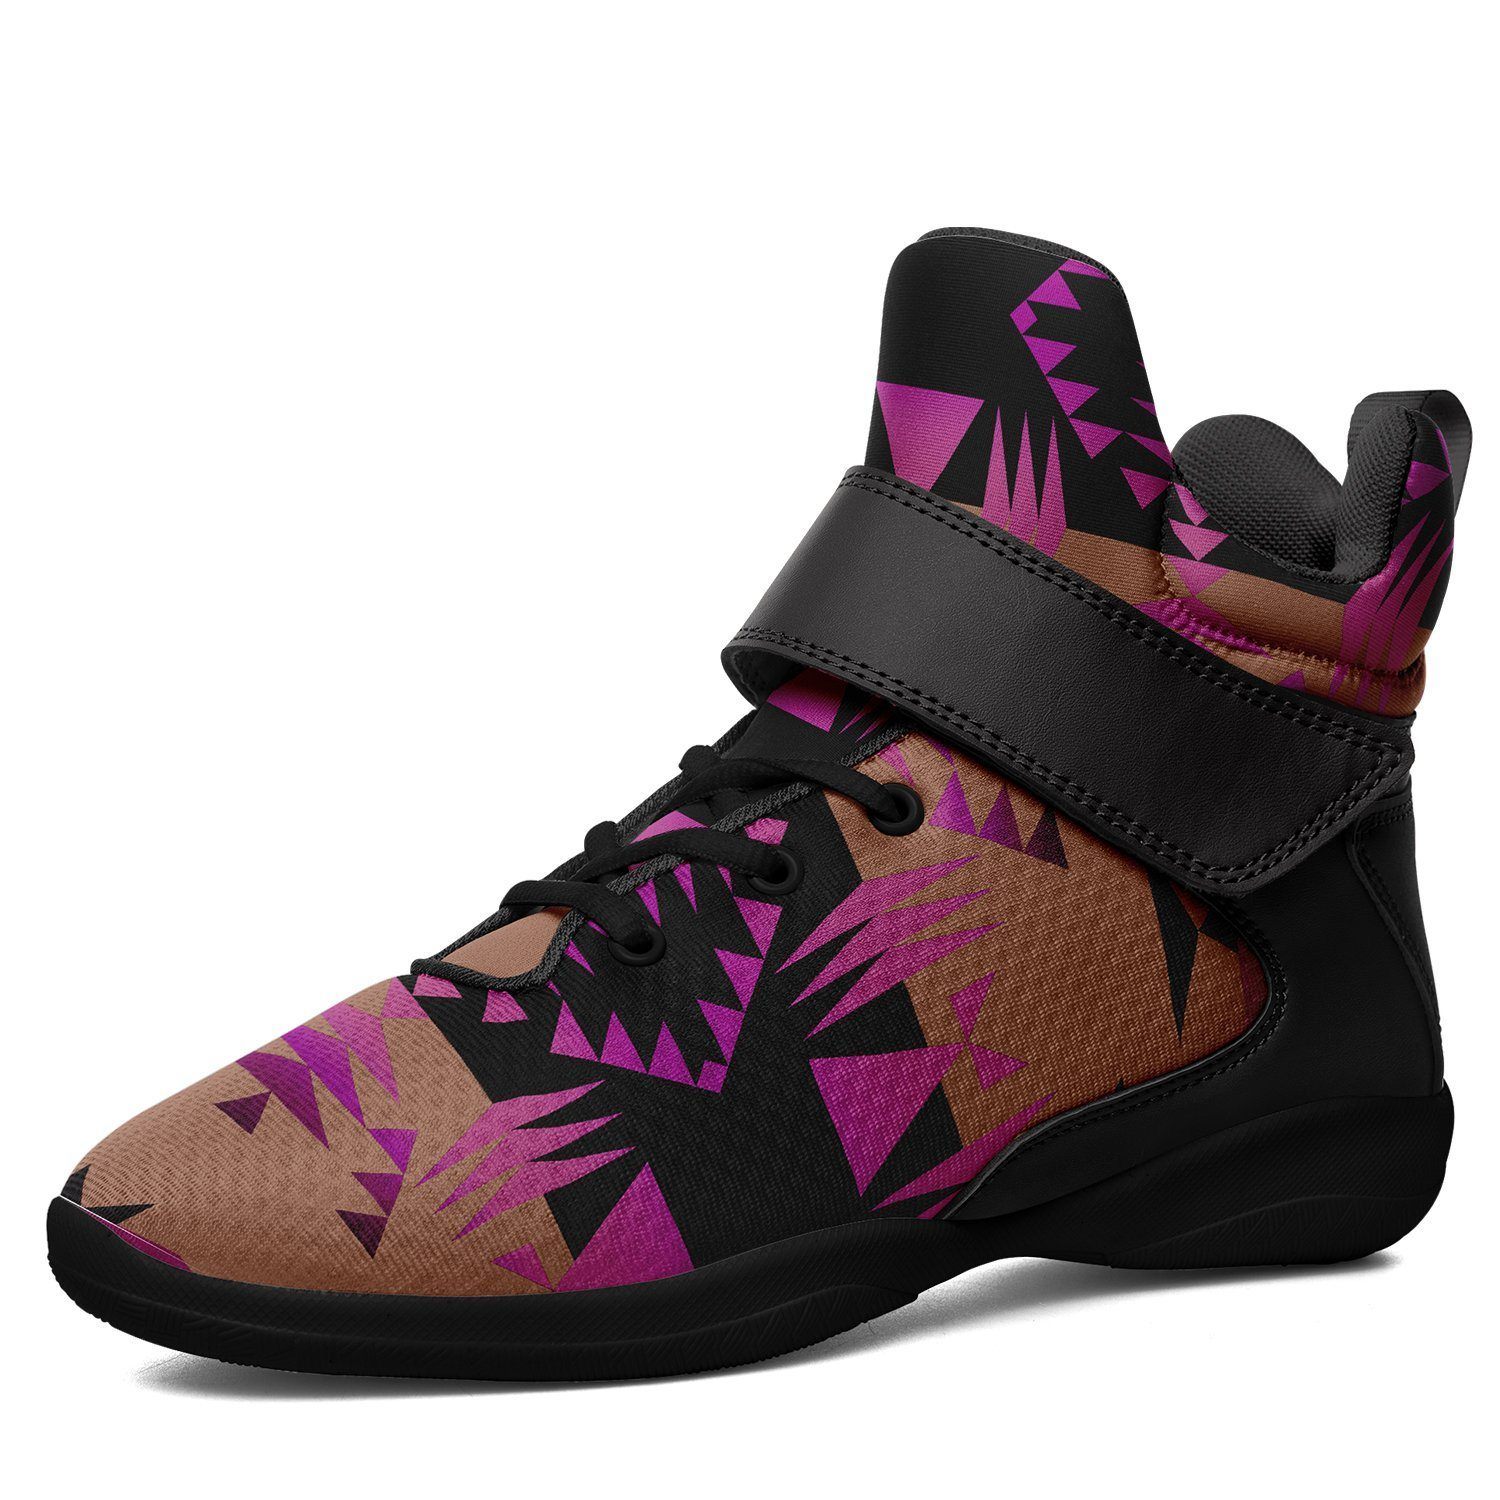 Between the Mountains Berry Kid's Ipottaa Basketball / Sport High Top Shoes 49 Dzine US Women 4.5 / US Youth 3.5 / EUR 35 Black Sole with Black Strap 